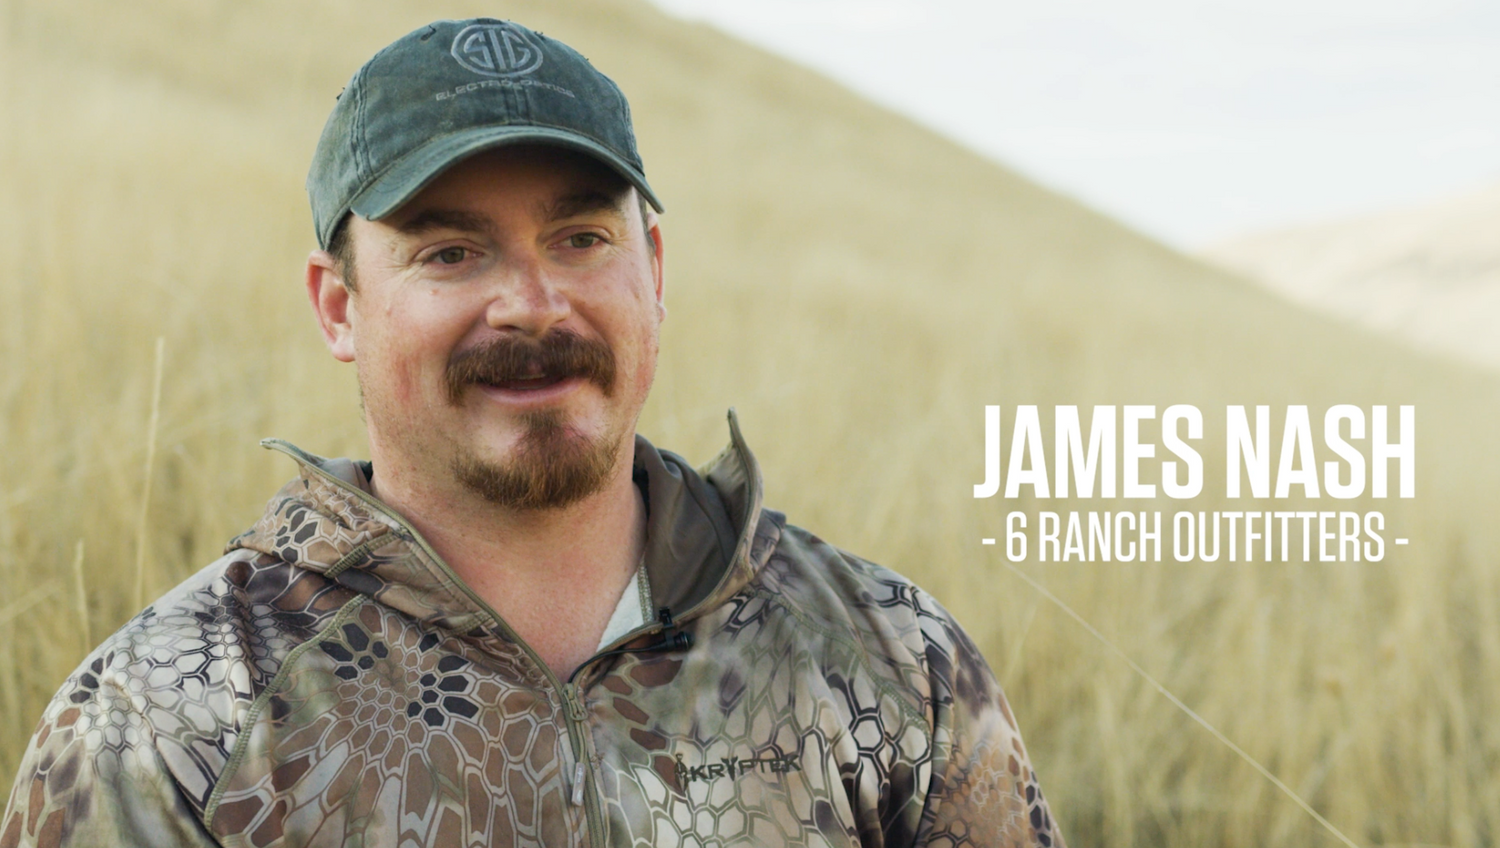 James Nash of 6 Ranch Outfitters